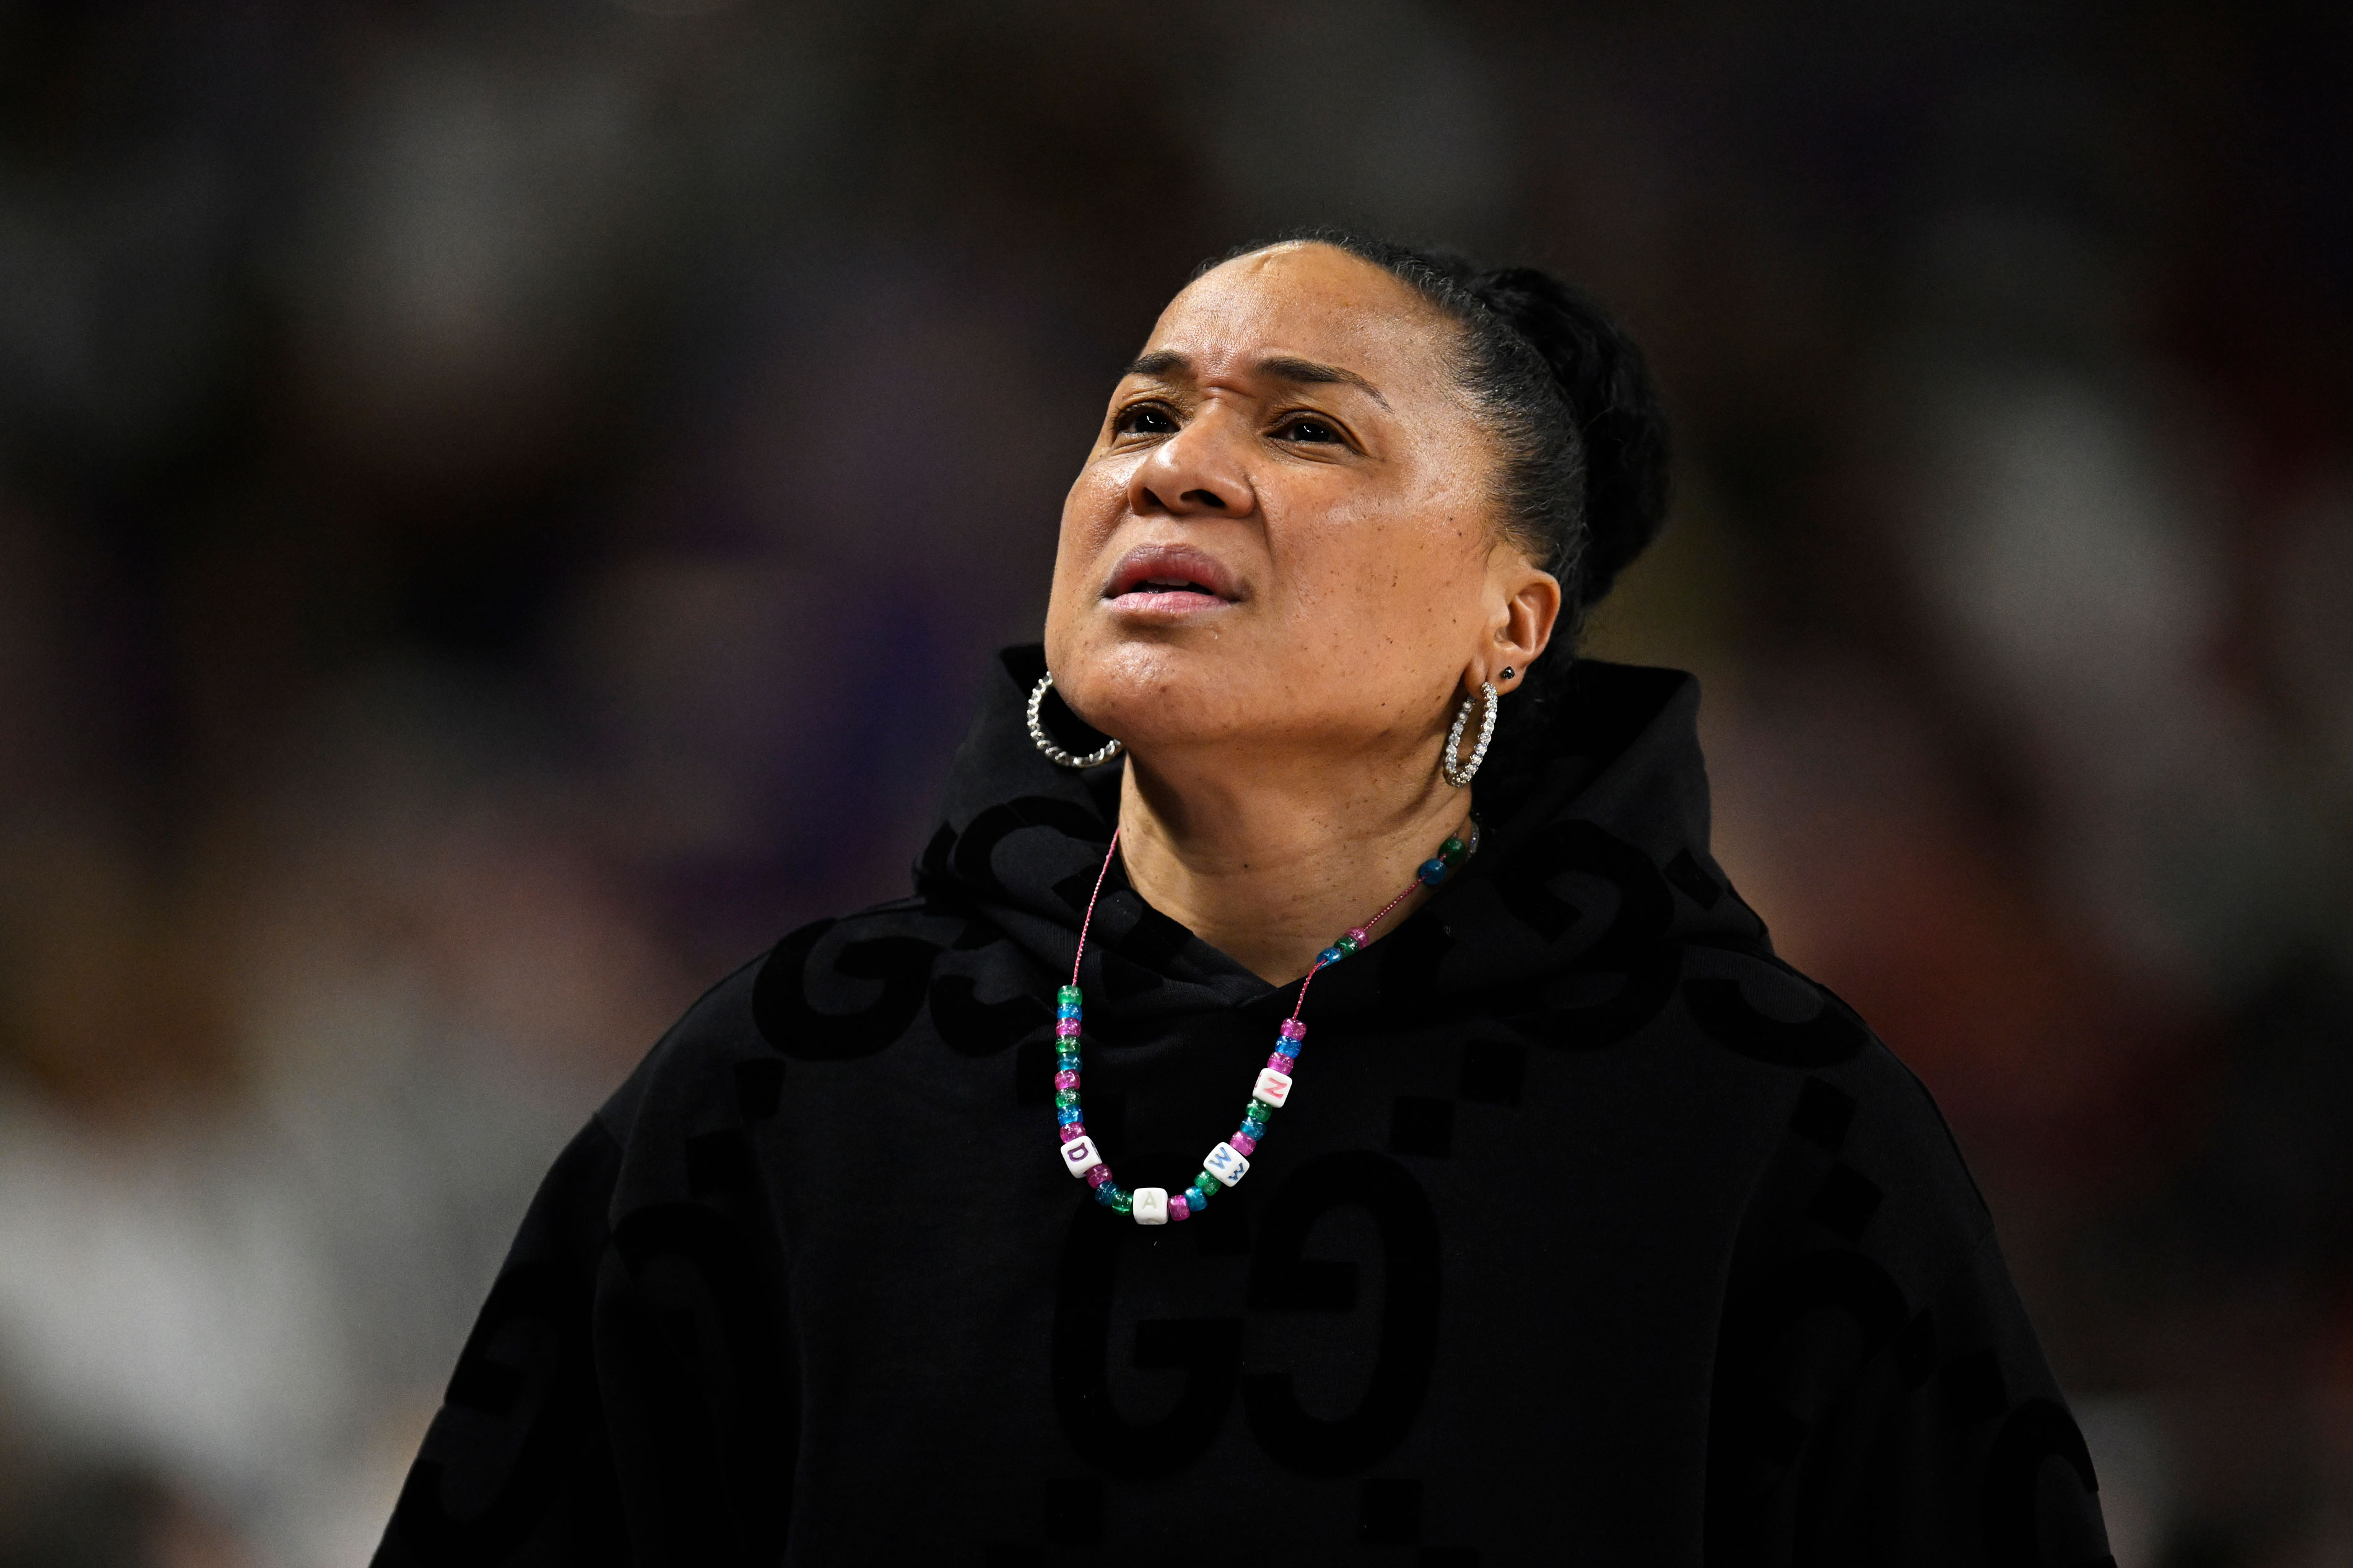 Dawn Staley, a Philadelphia native who graduated from Dobbins Tech, has found success in women’s basketball as a player and a coach.